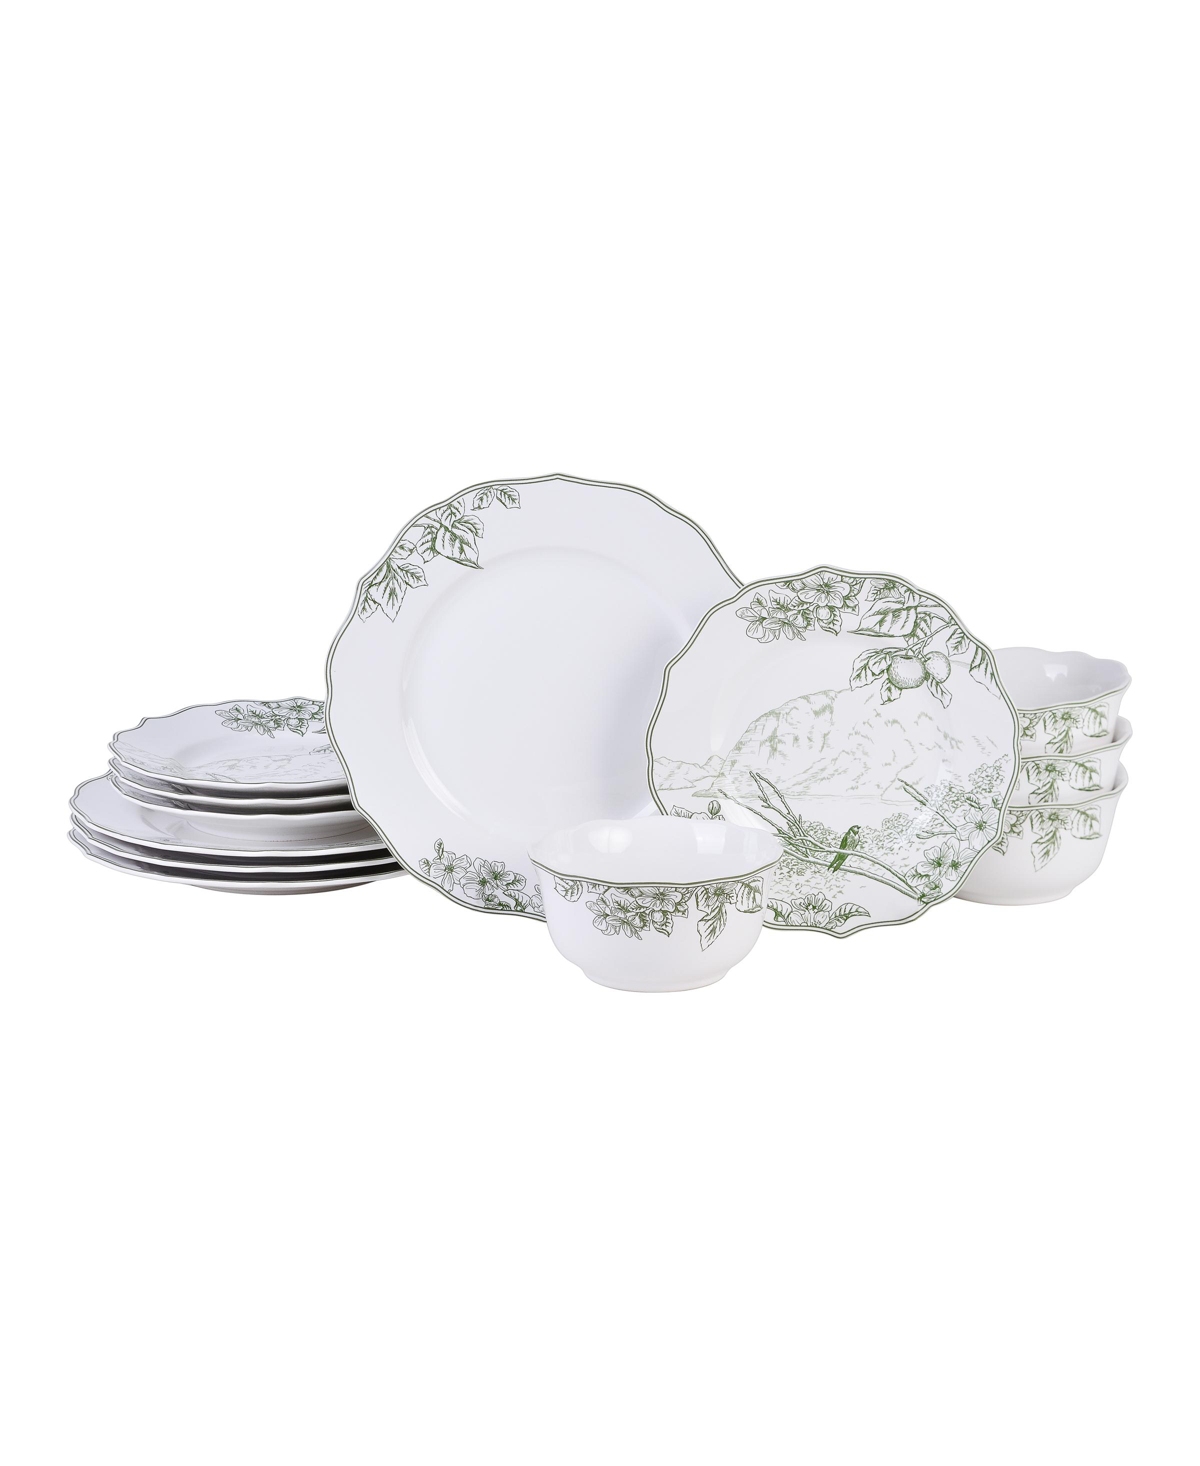 Hudson Valley Decal on White Background Porcelain 12 Pc Dinnerware Set, Service for 4 - Green